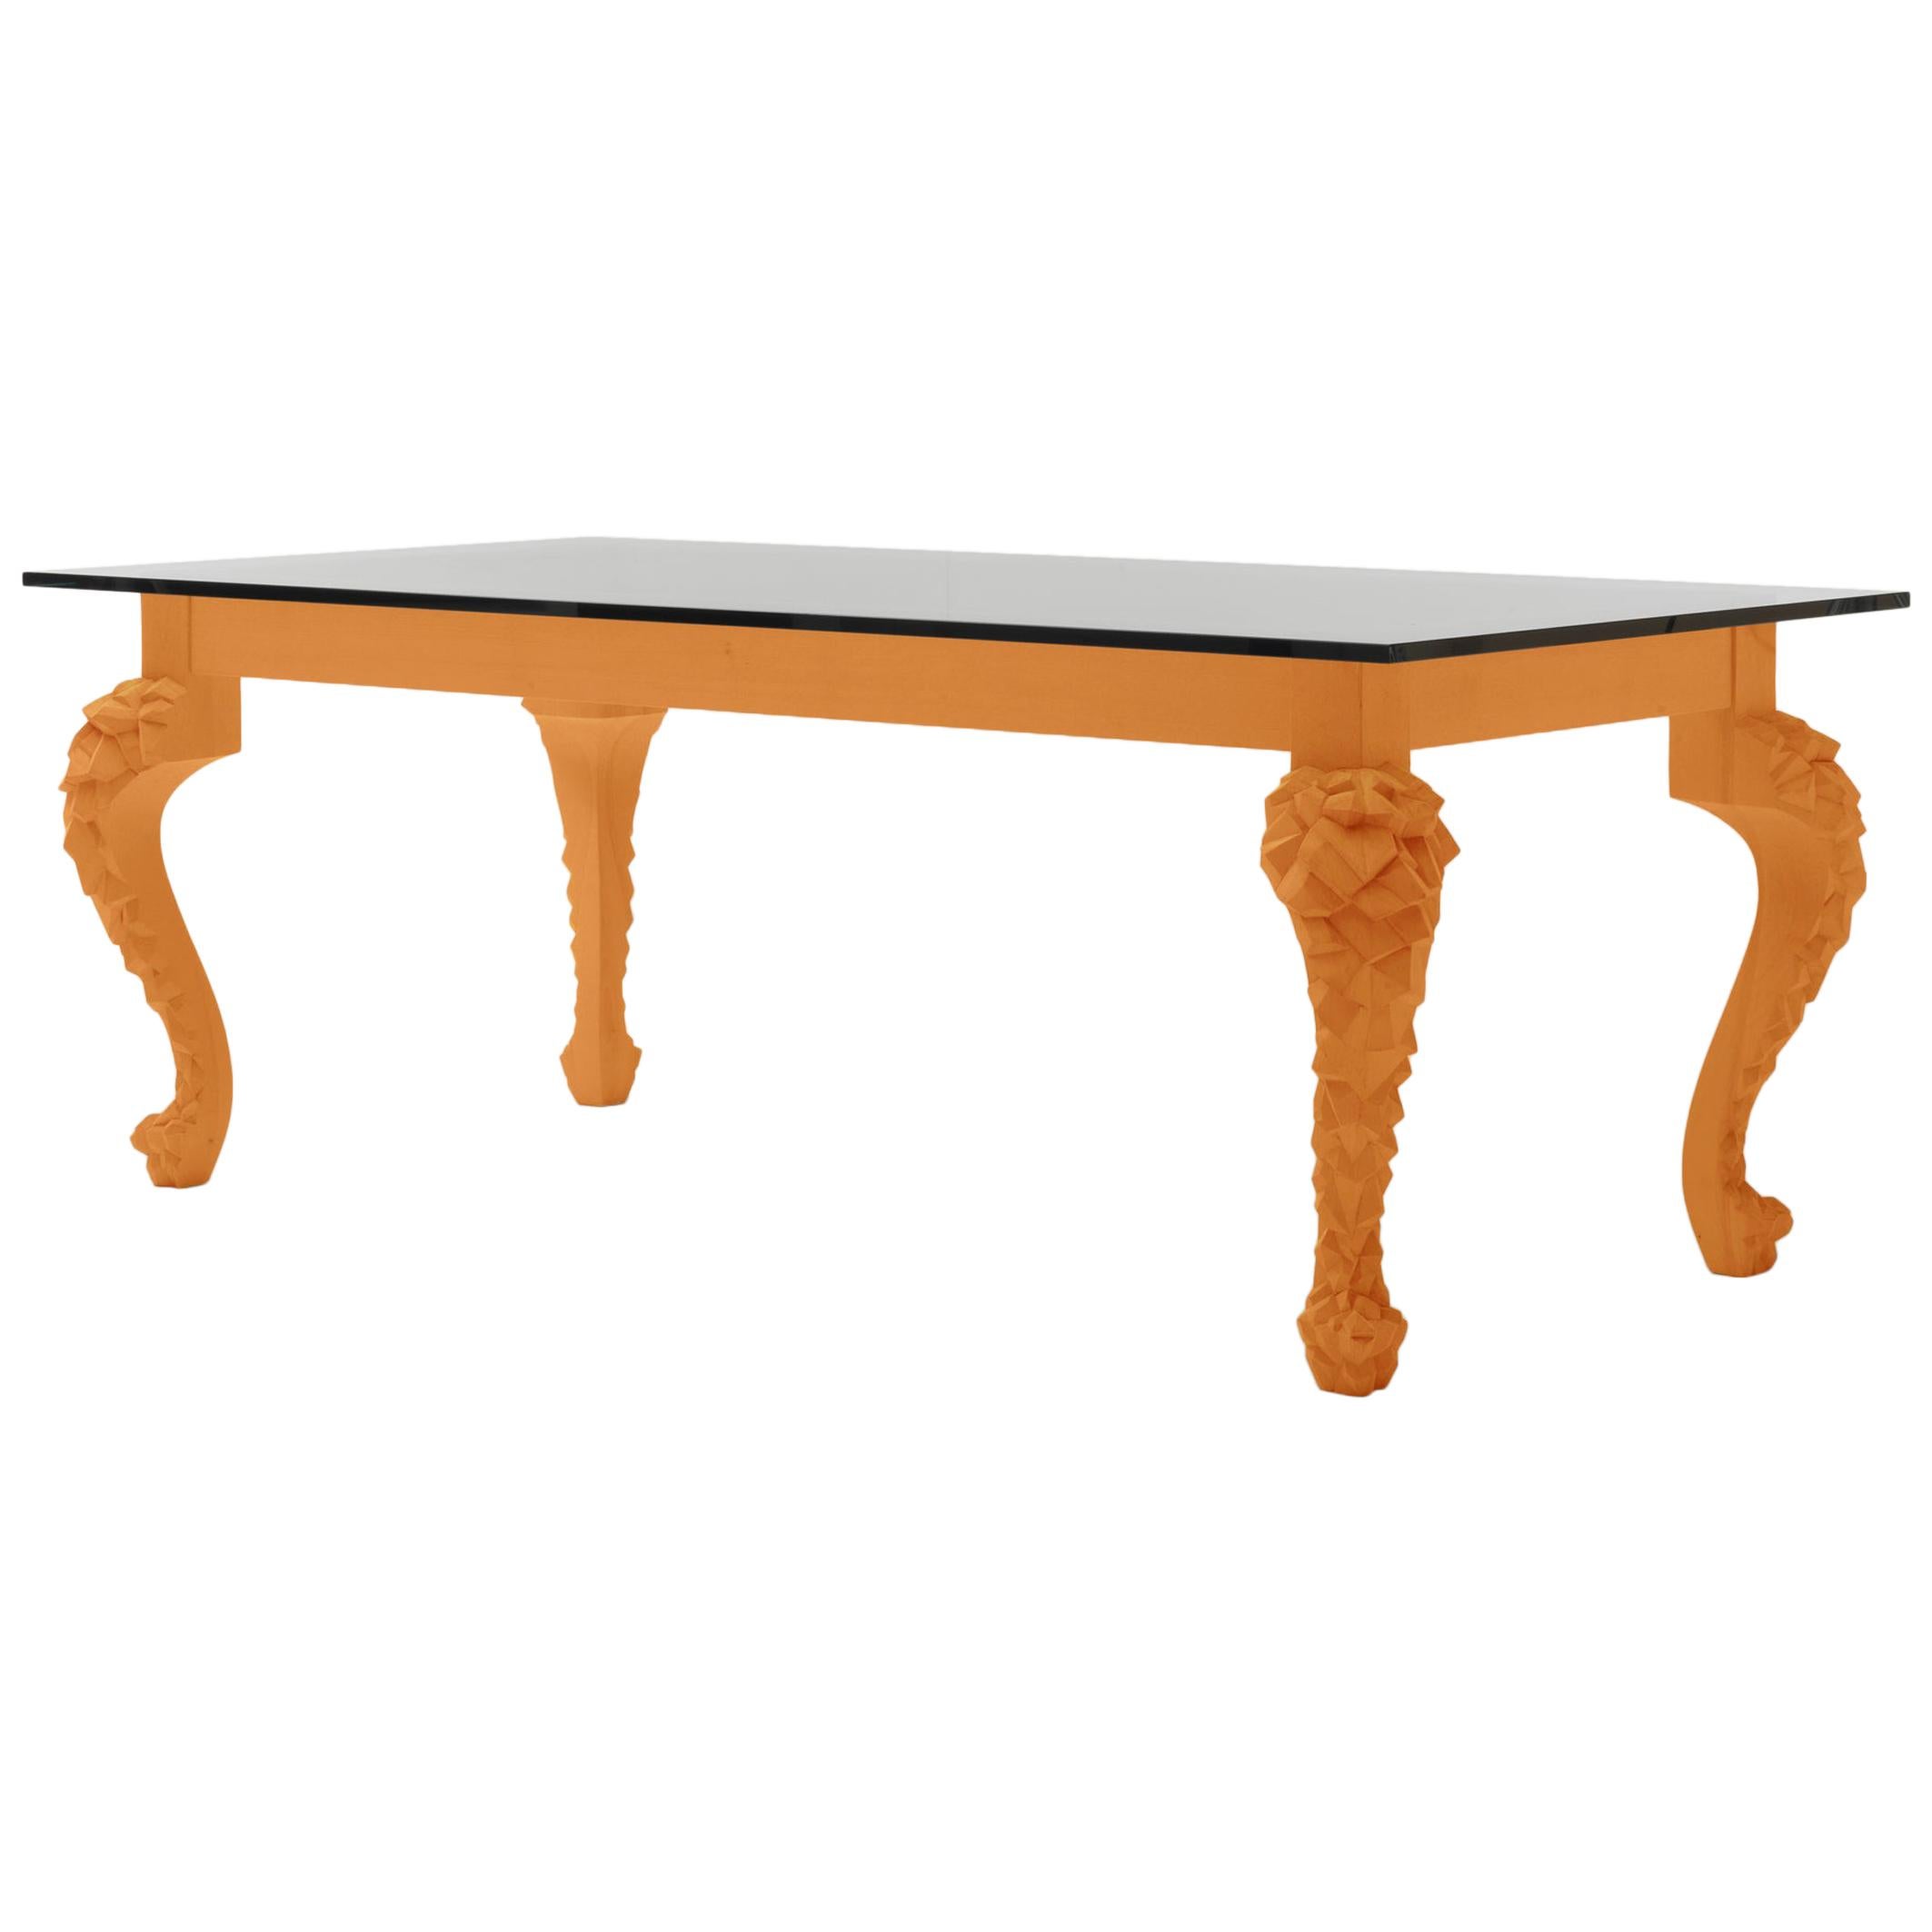 CRUSTY Orange Dining Table with Carved Legs and Glass Top by Nigel Coates